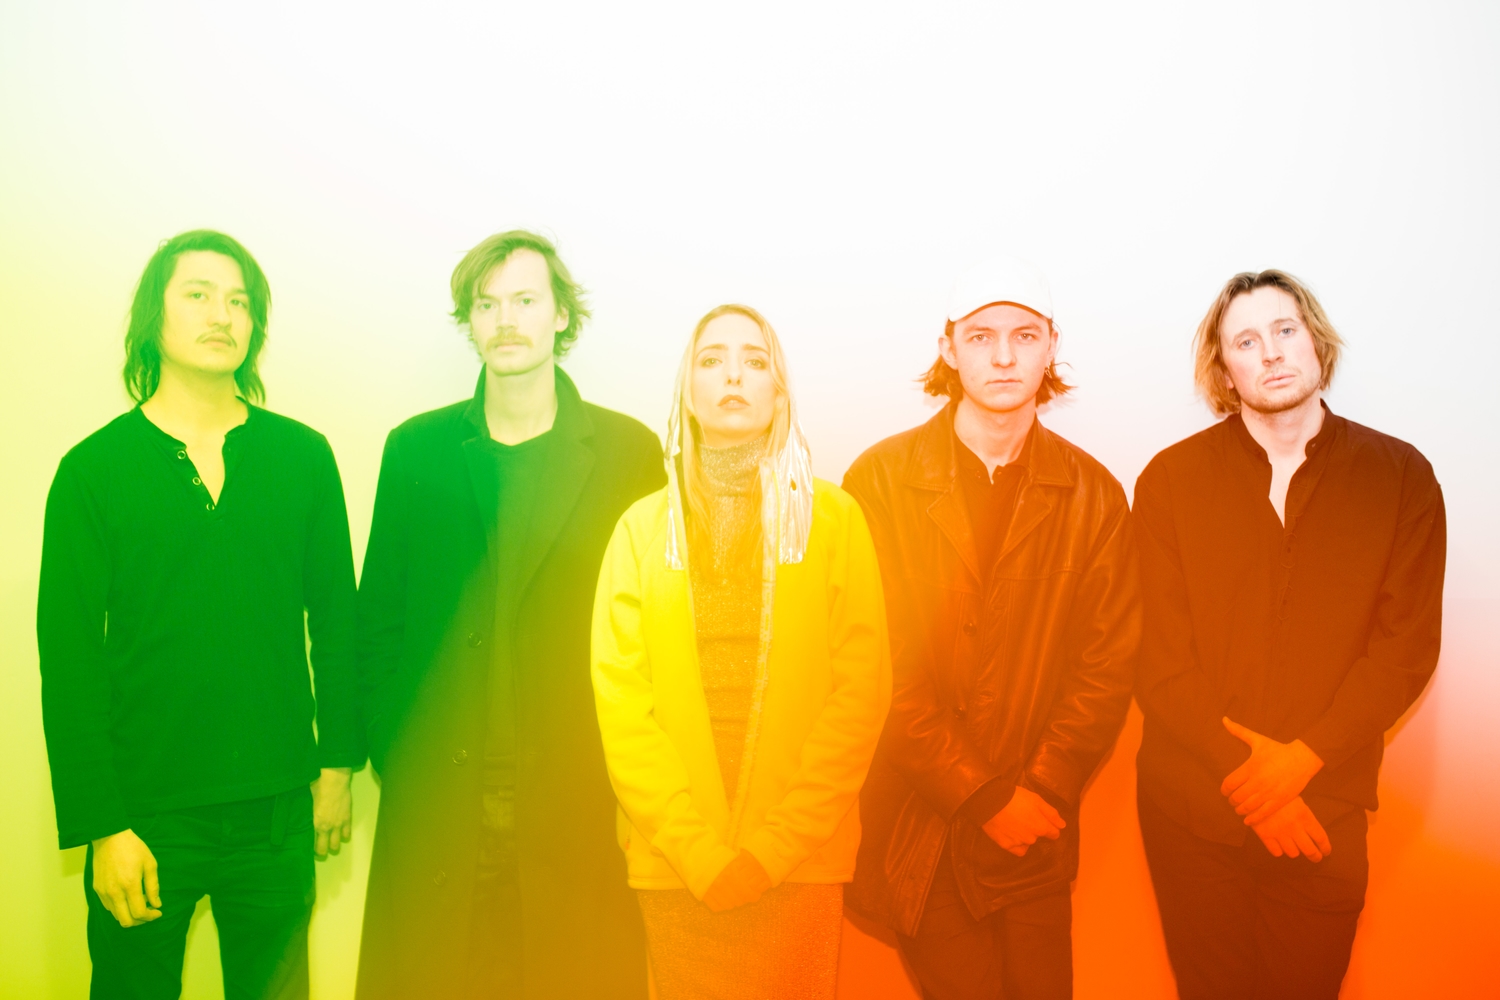 Pumarosa: “We try and work everyone up into a euphoric state"